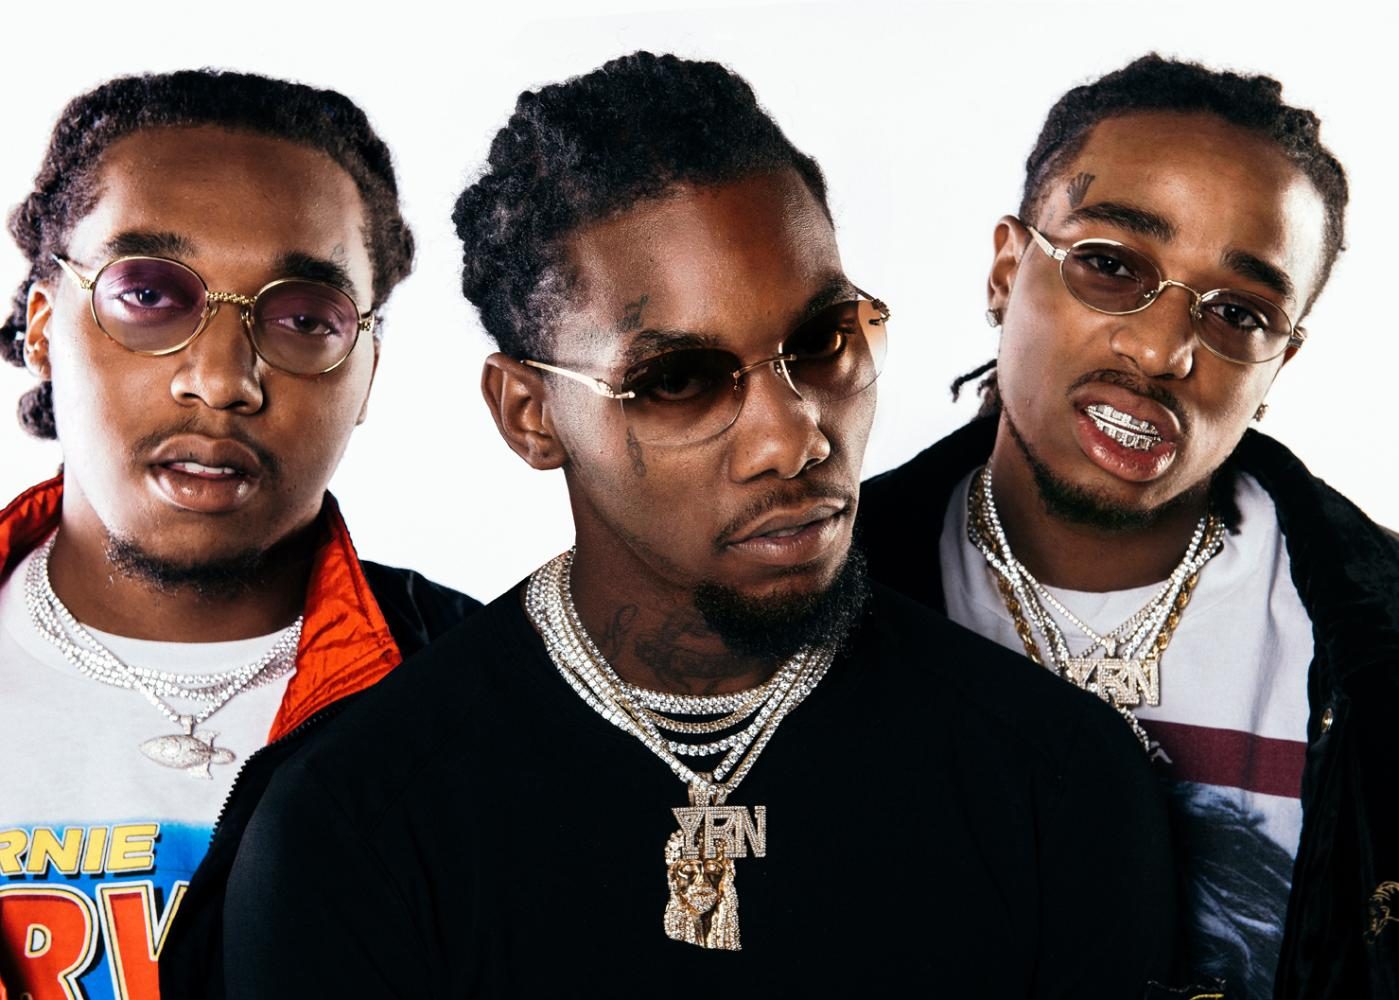 Migos+ft.+Cheat+Codes%3A+Fall+Concert+2017